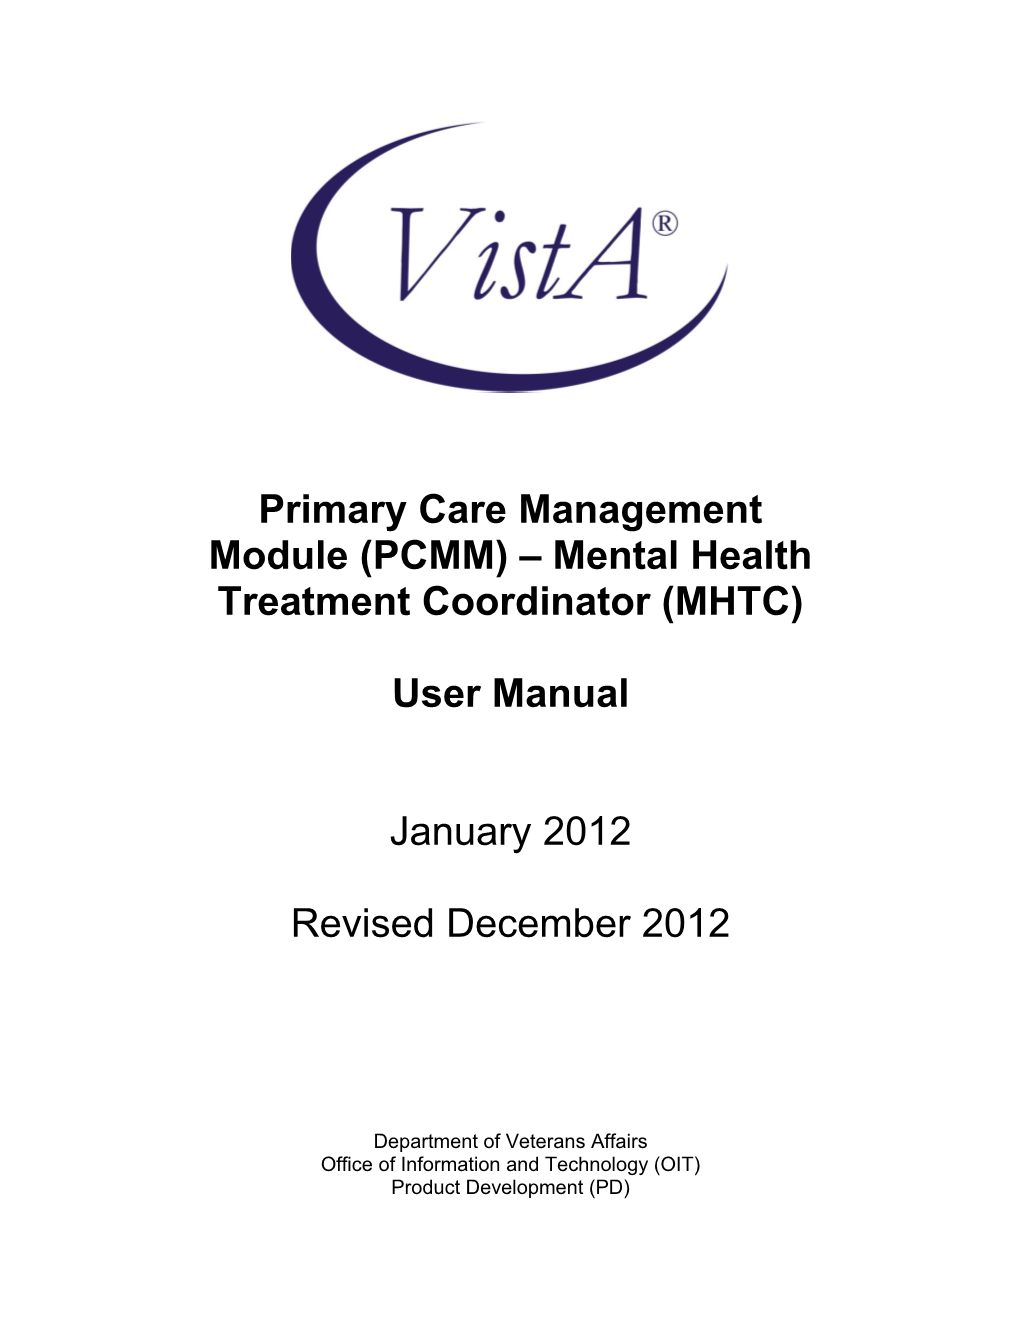 Primary Care Management Module User Manual